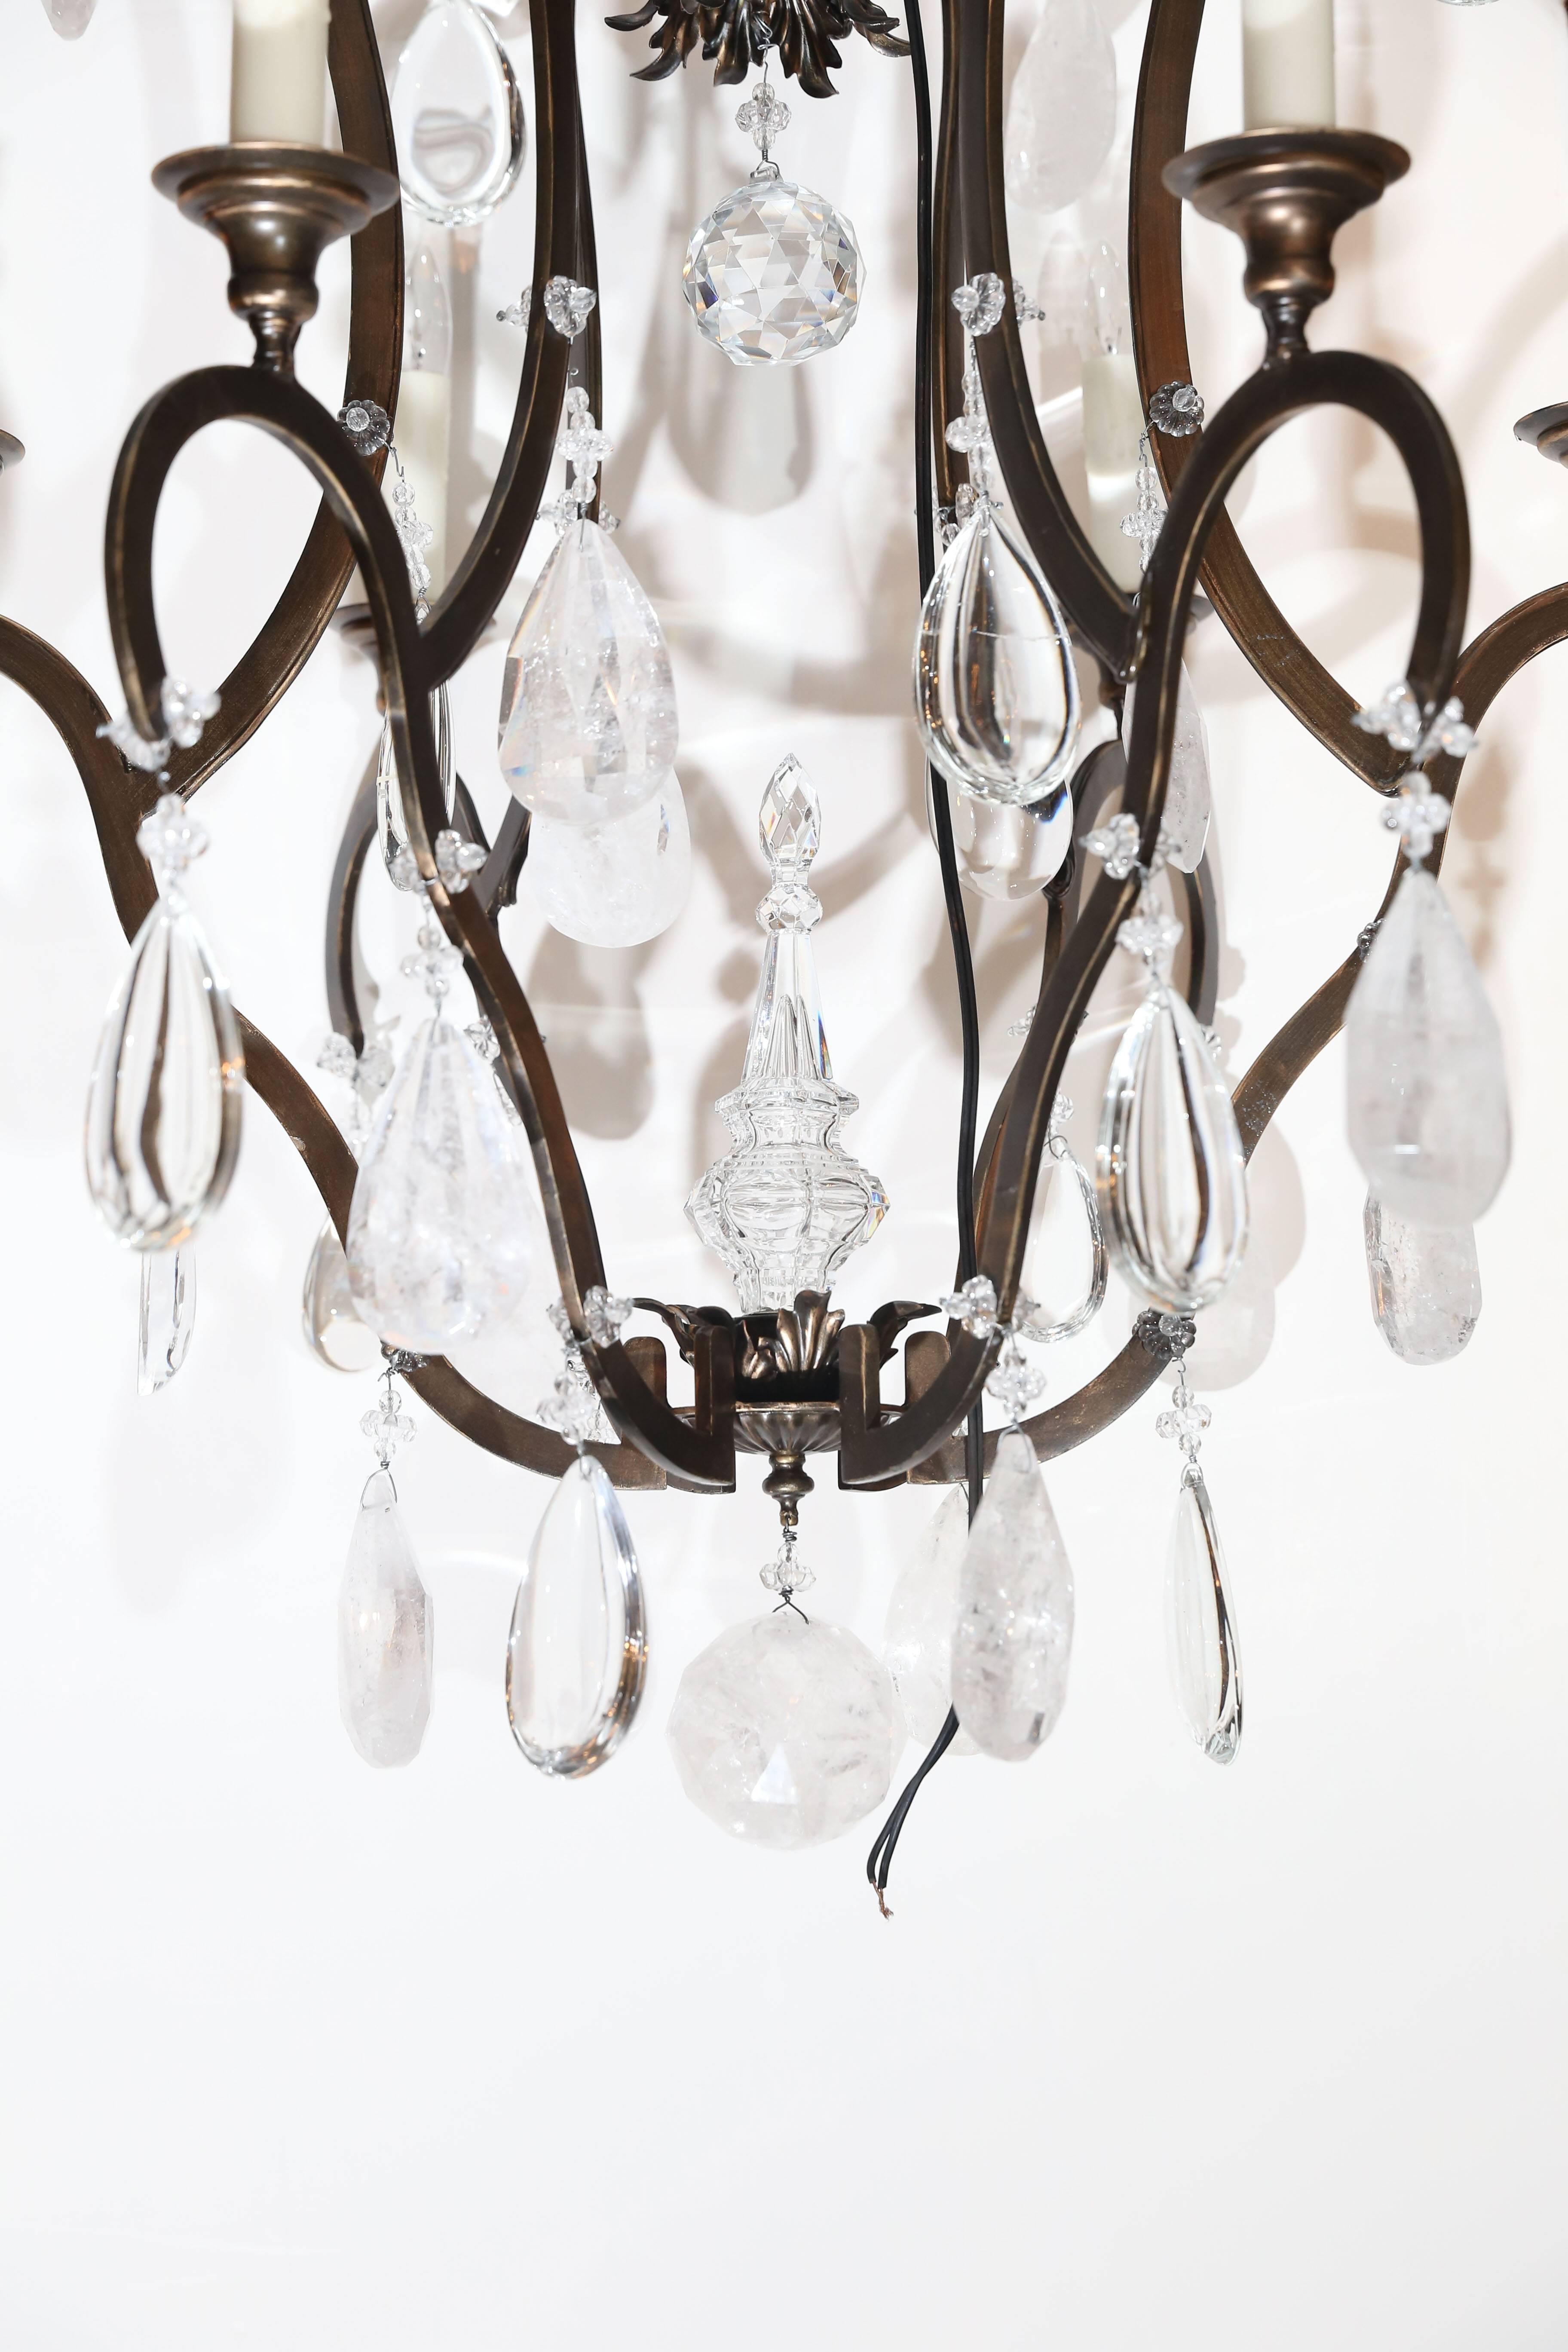 Wrought Iron 6-Light Chandelier with large Glass Drops